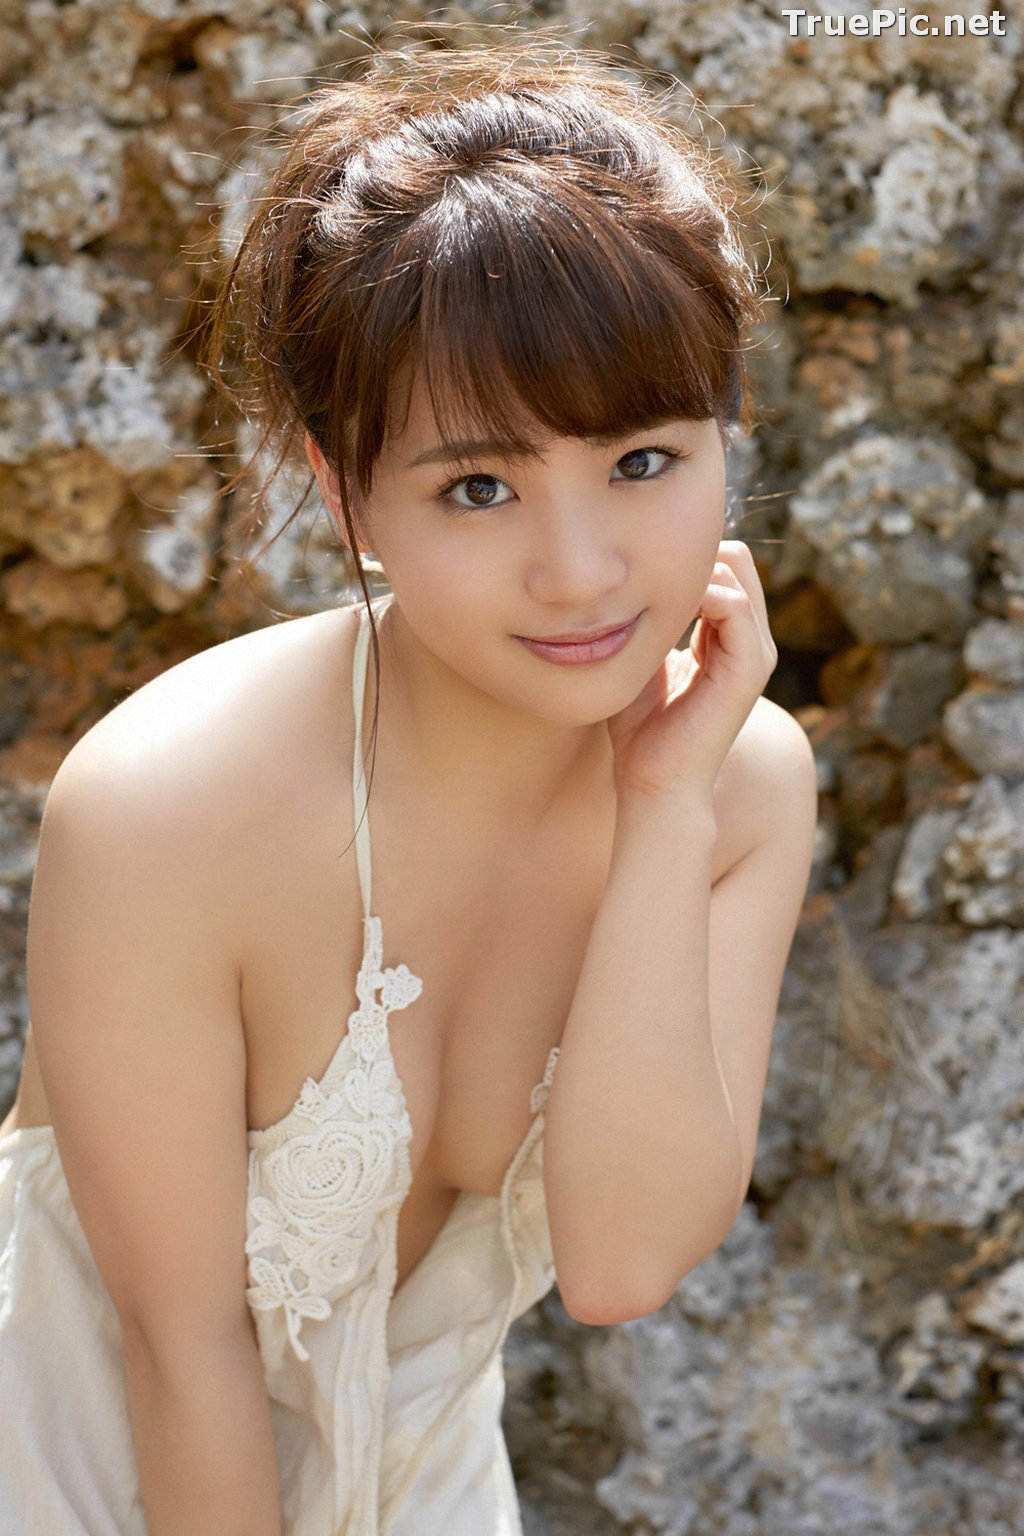 Image Japanese Actress And Model – Natsumi Hirajima (平嶋夏海) - Sexy Picture Collection 2021 - TruePic.net - Picture-102